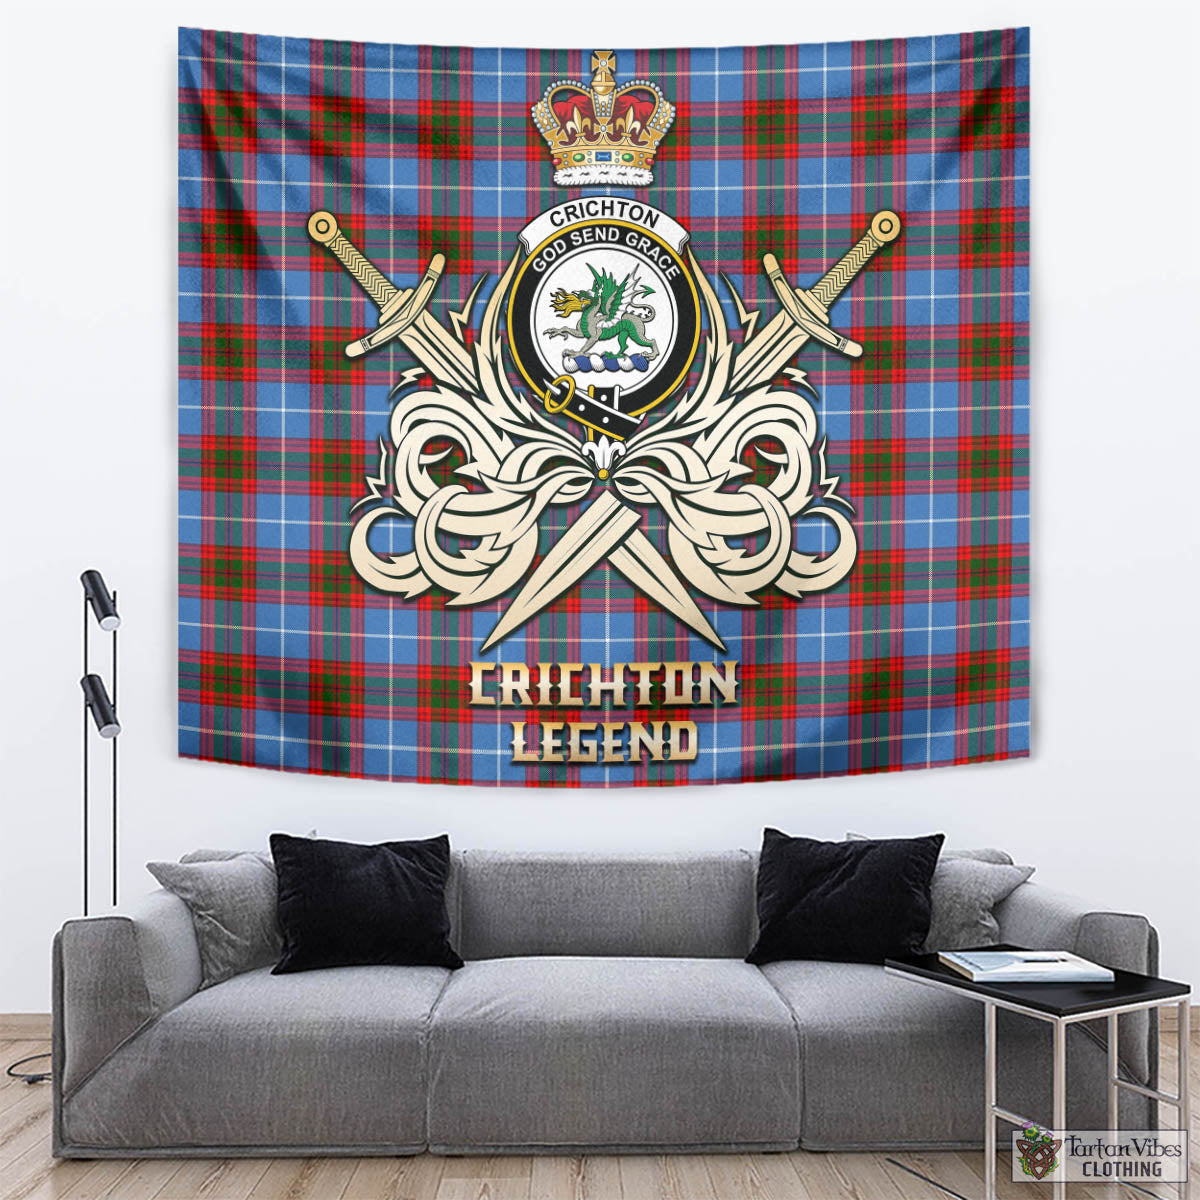 Tartan Vibes Clothing Crichton Tartan Tapestry with Clan Crest and the Golden Sword of Courageous Legacy